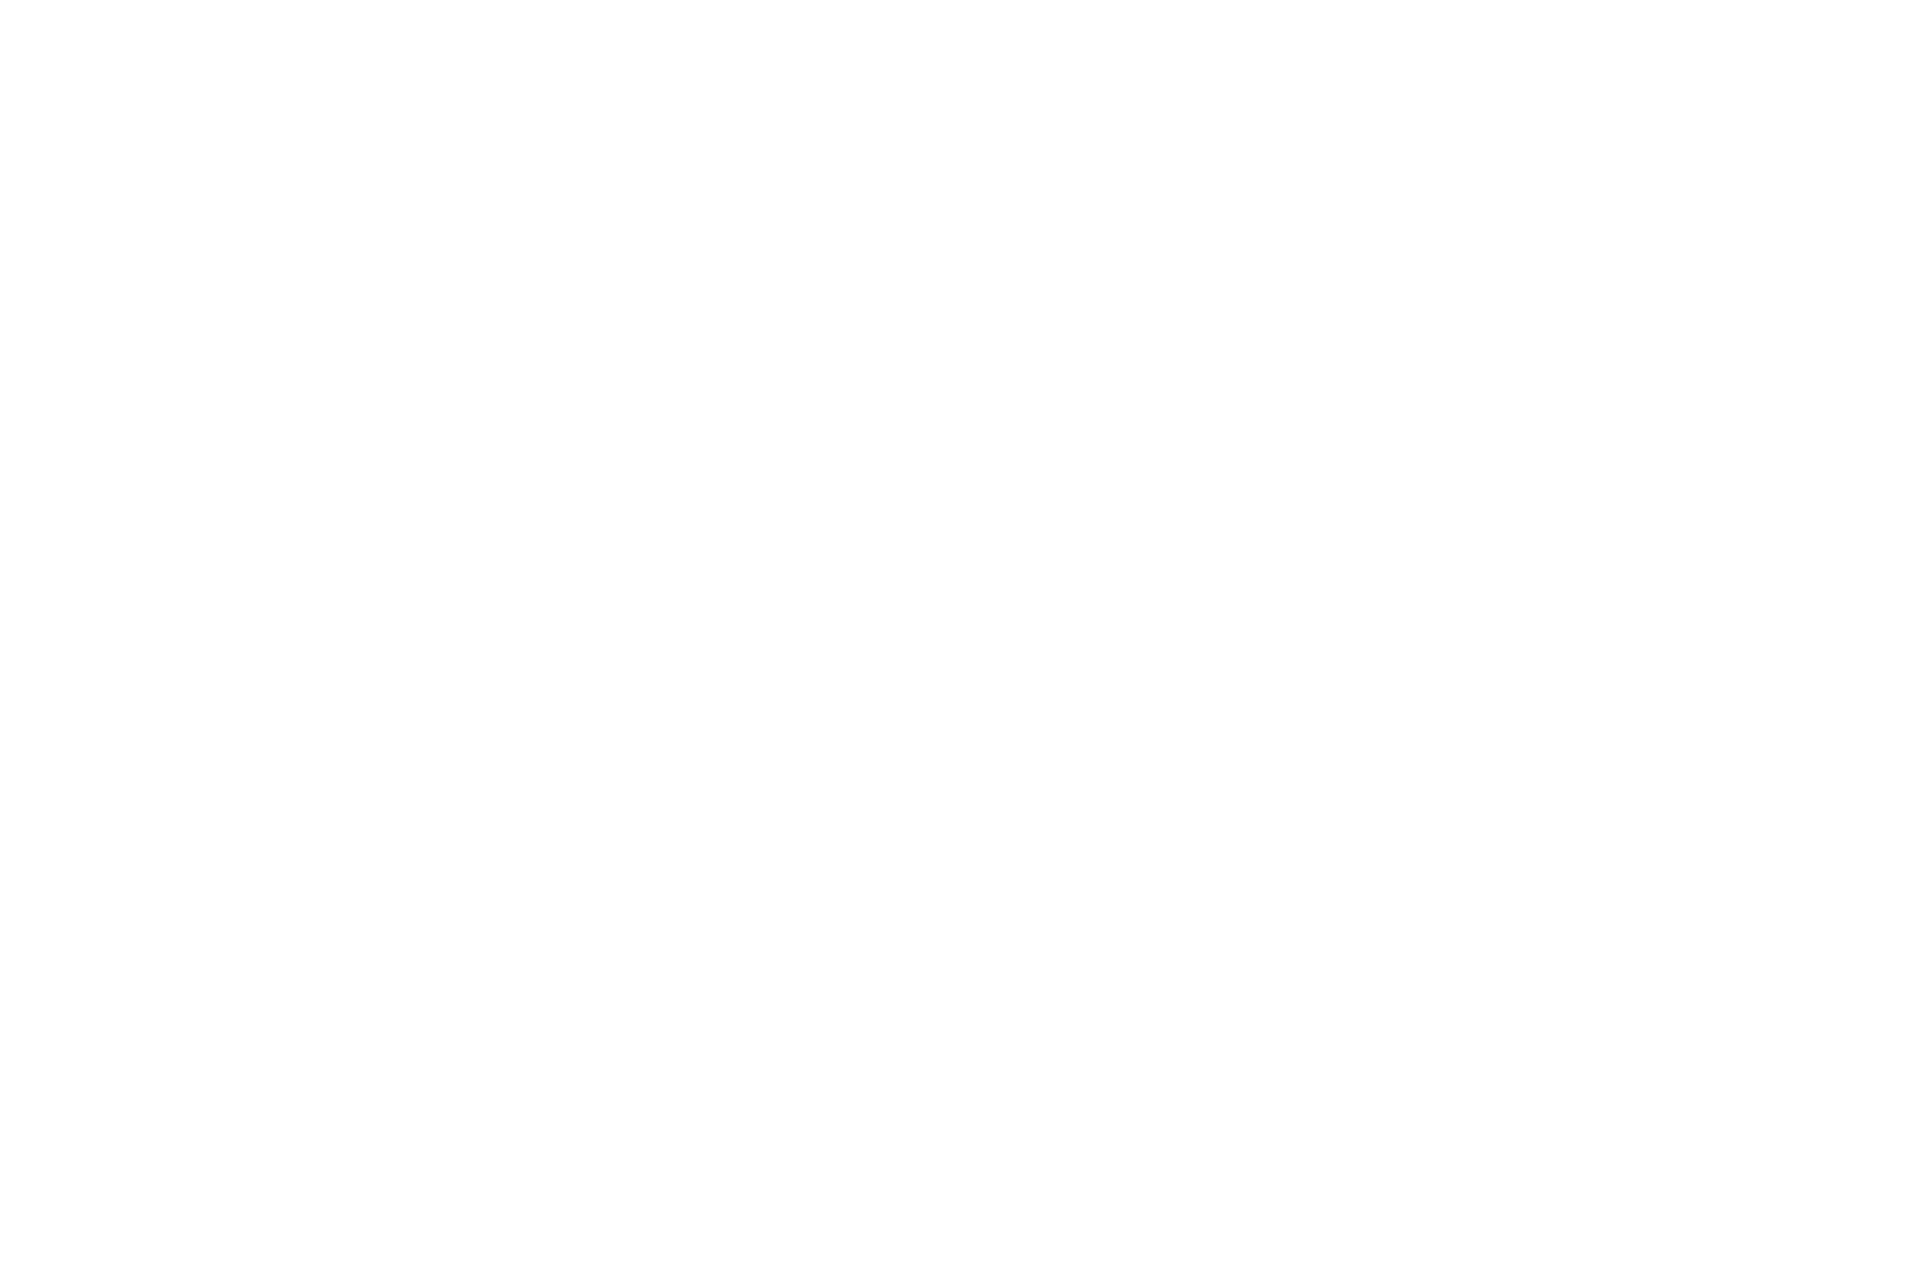 Next Great Minds Campaign